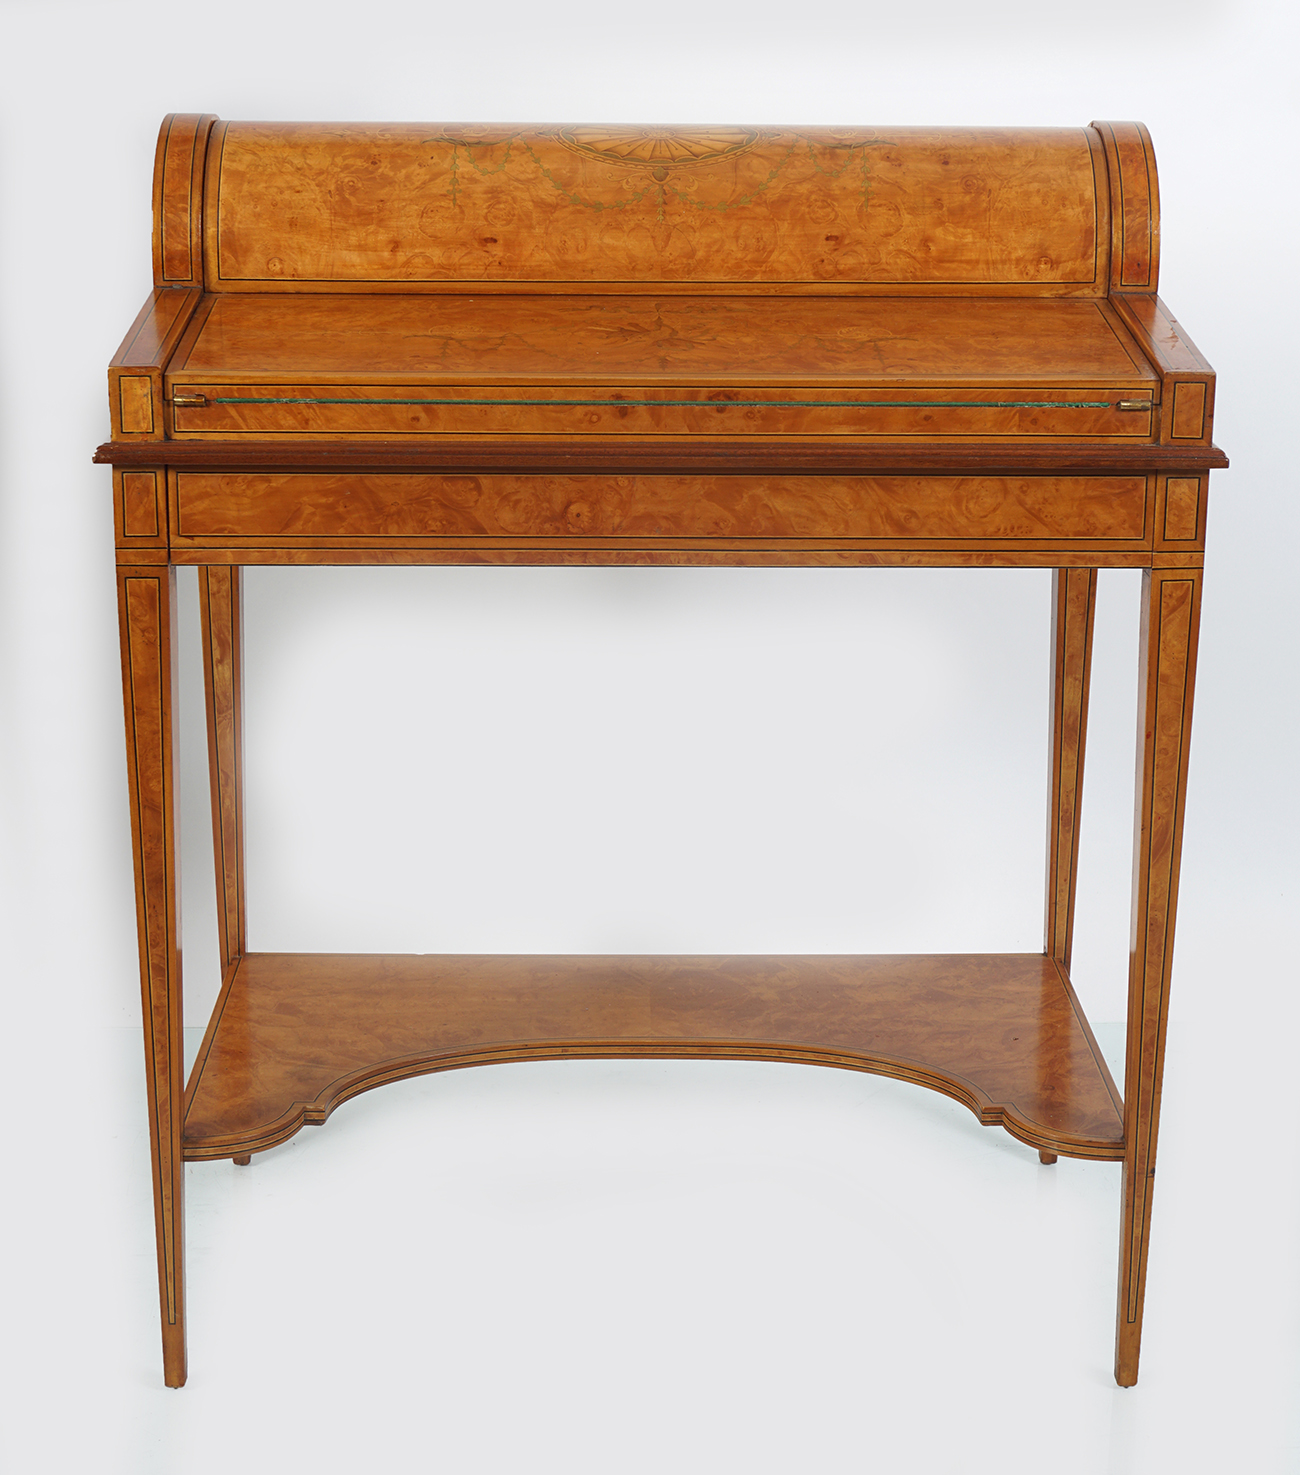 EDWARDIAN SATINWOOD AND MARQUETRY WRITING DESK